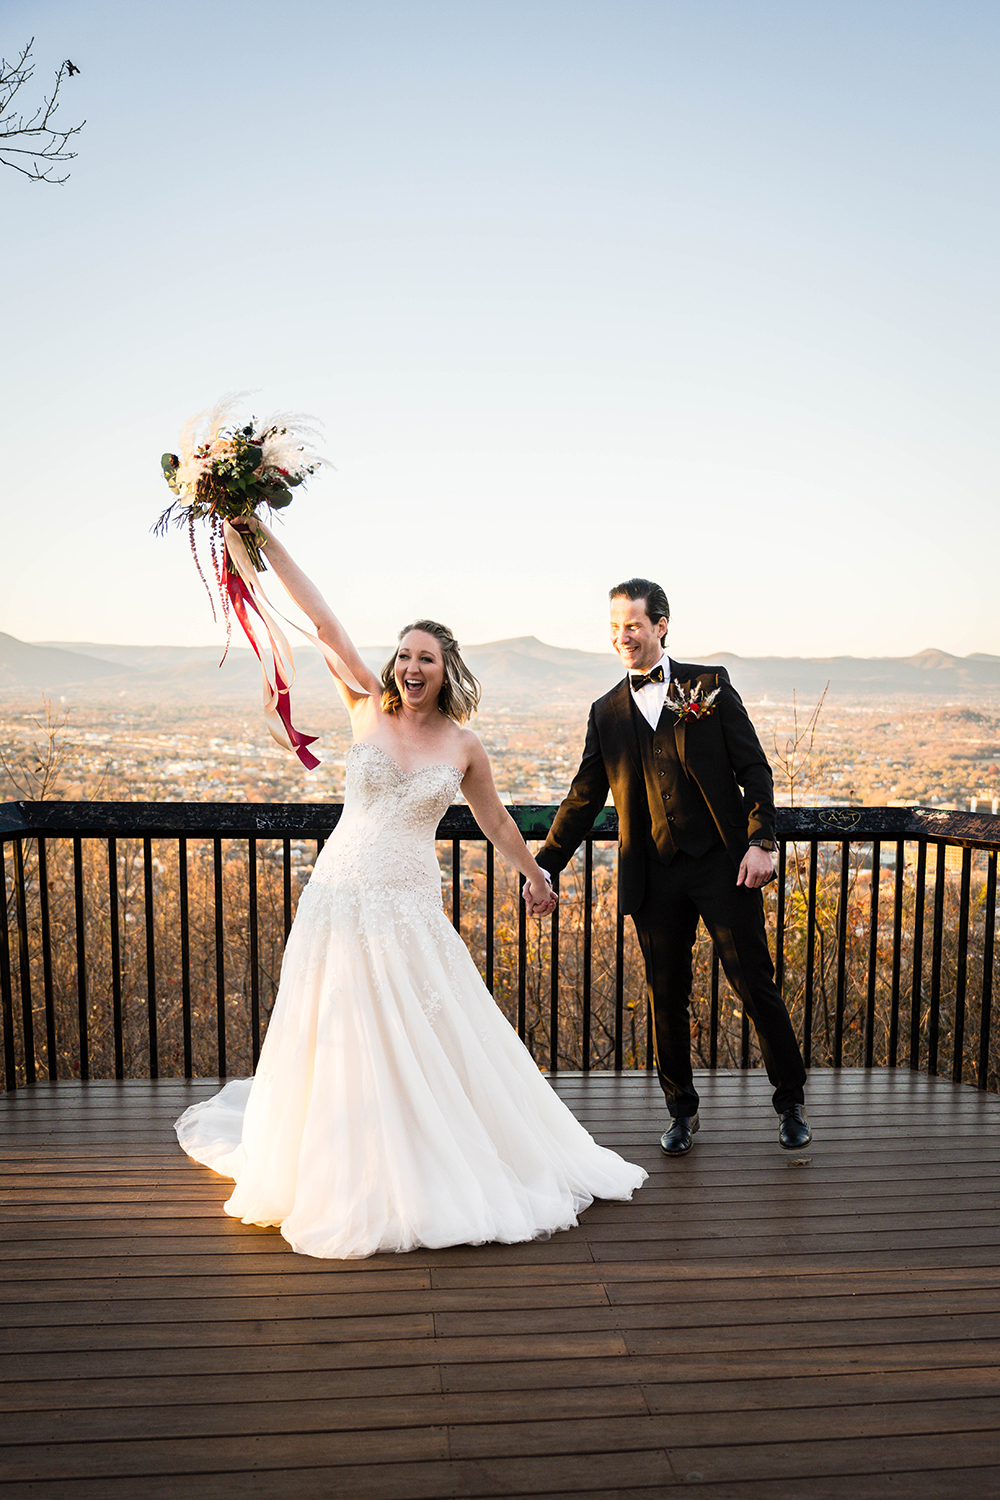 A couple hold hands and smile widely as they finish their ceremony and become husband and wife at Mill Mountain Star in Roanoke, Virginia.